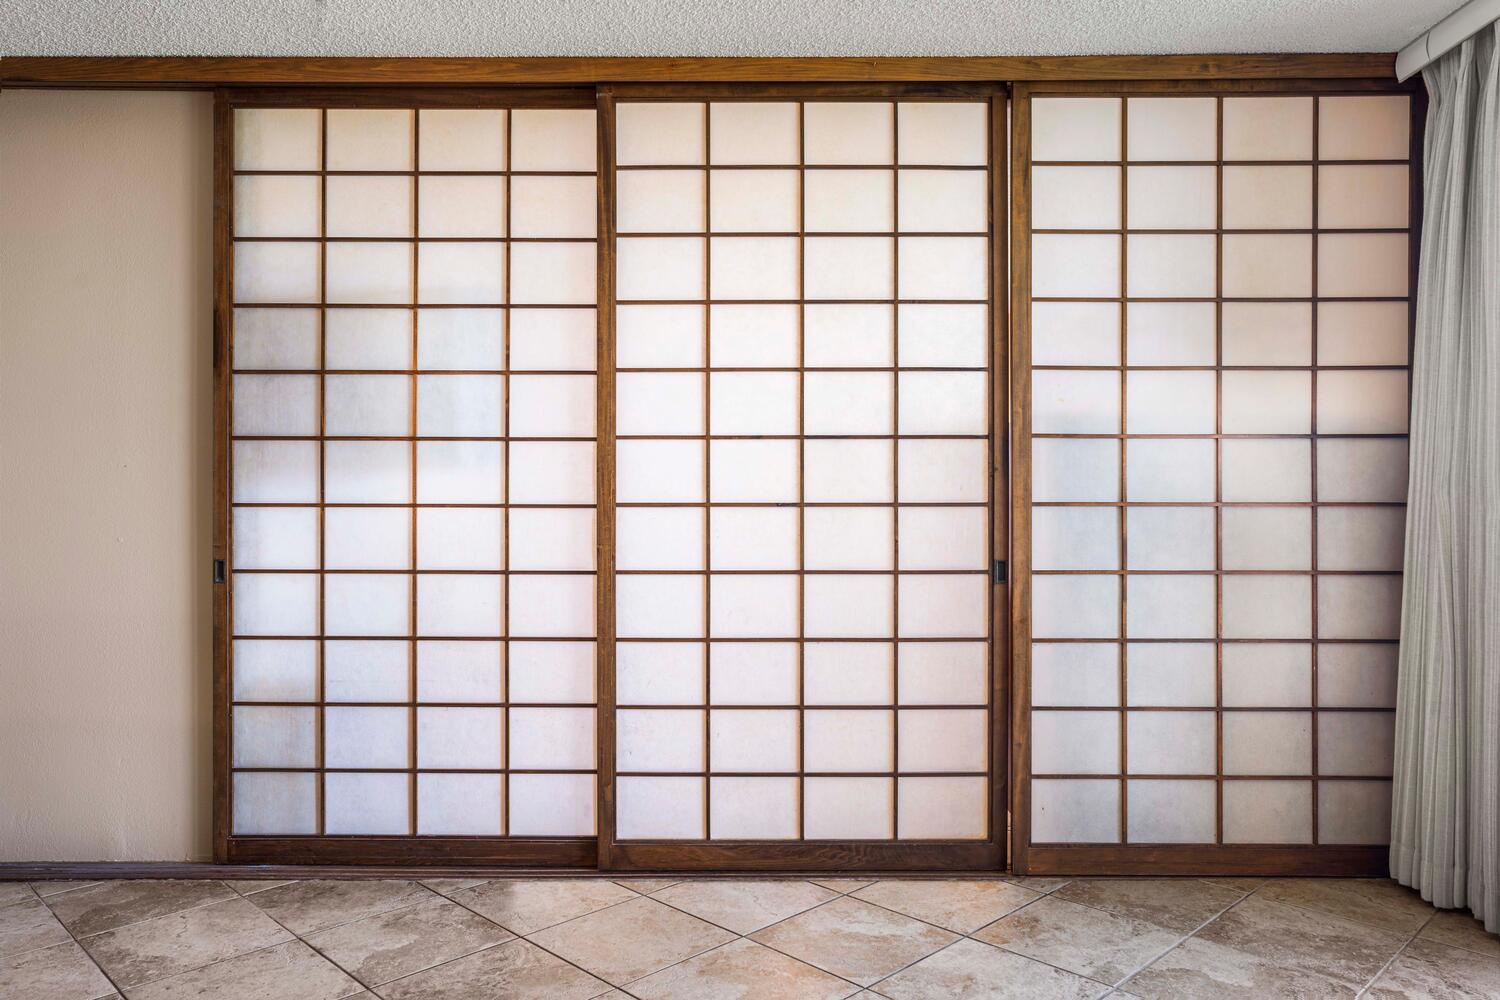 Kailua Kona Vacation Rentals, Keauhou Kona Surf & Racquet 1104 - Elegant Japanese-themed suite doors, artfully crafted to invite tranquility and harmony into your private retreat.